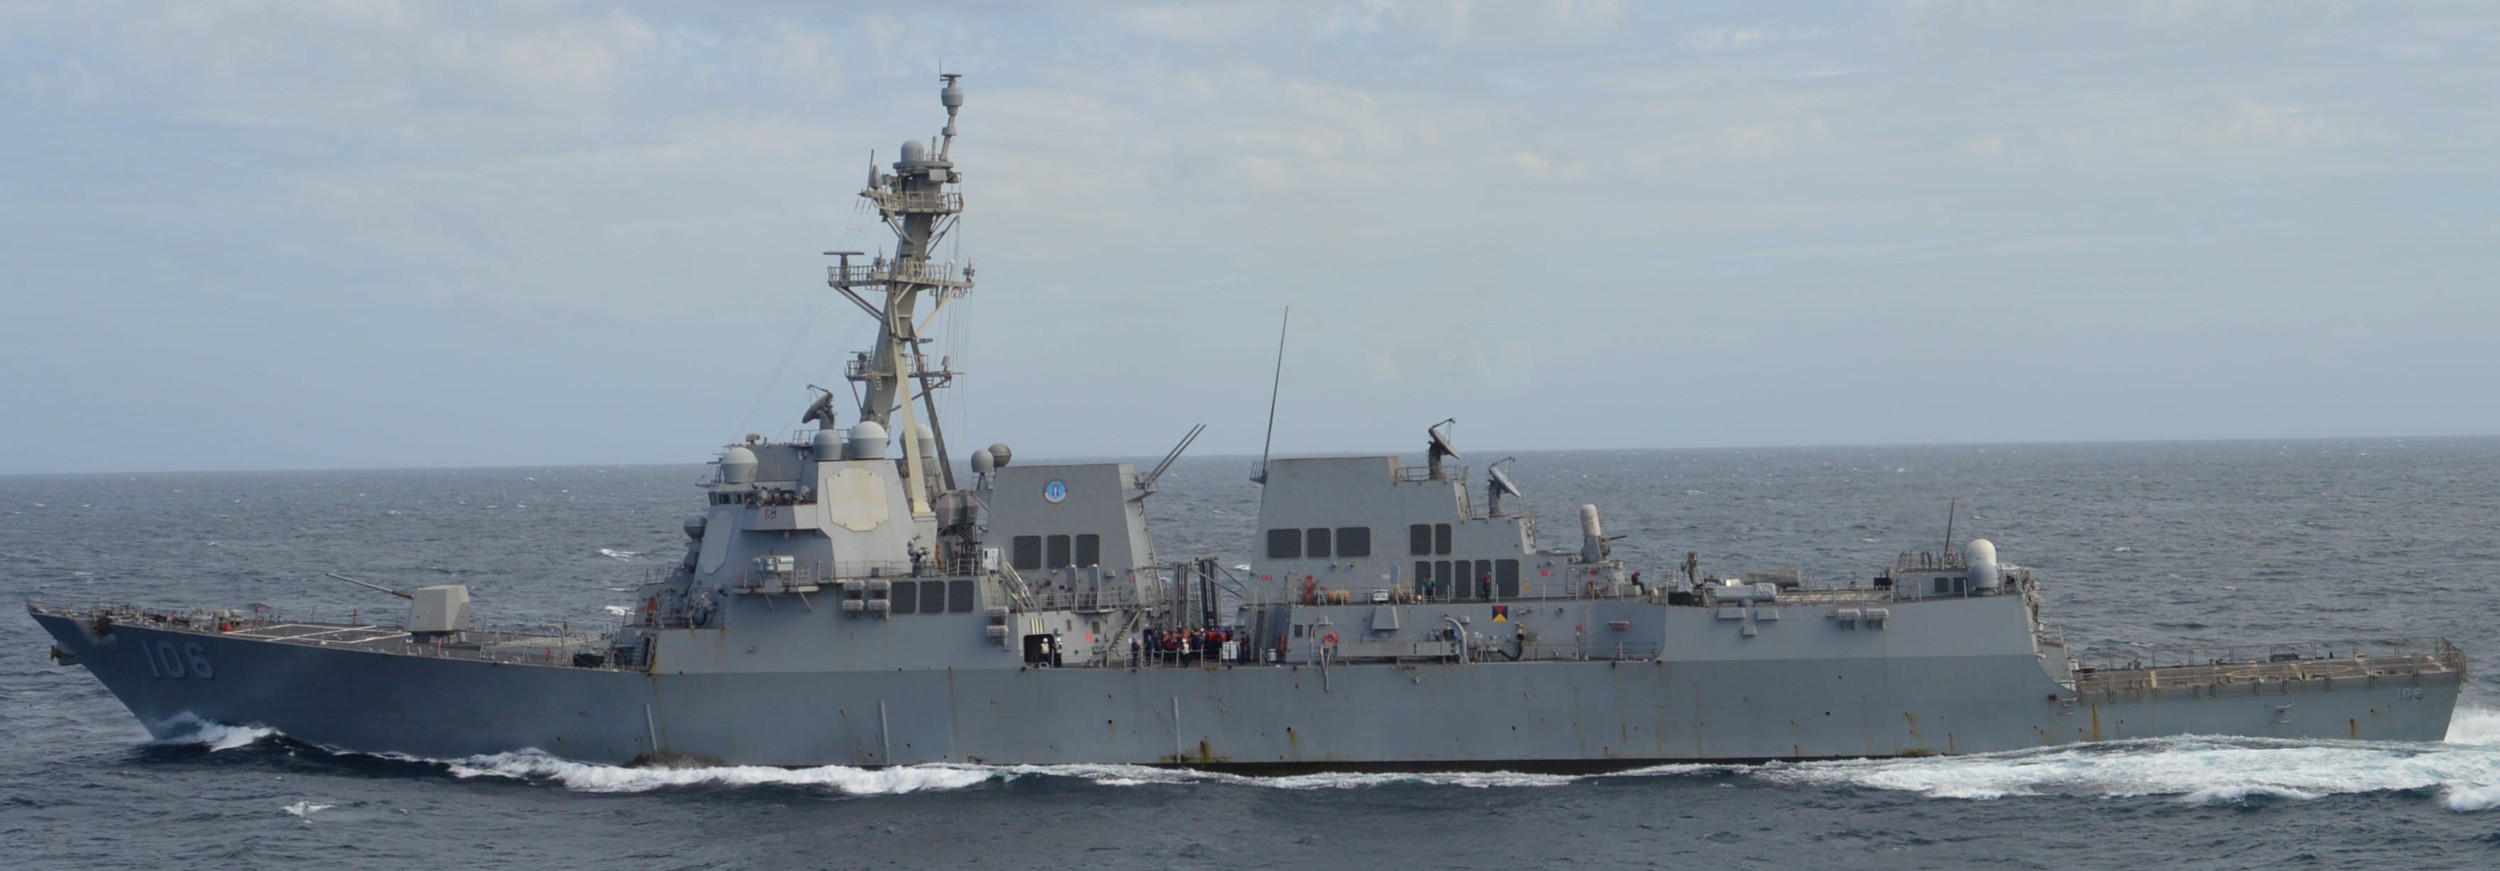 ddg-106 uss stockdale arleigh burke class guided missile destroyer aegis us navy bay of bengal 148